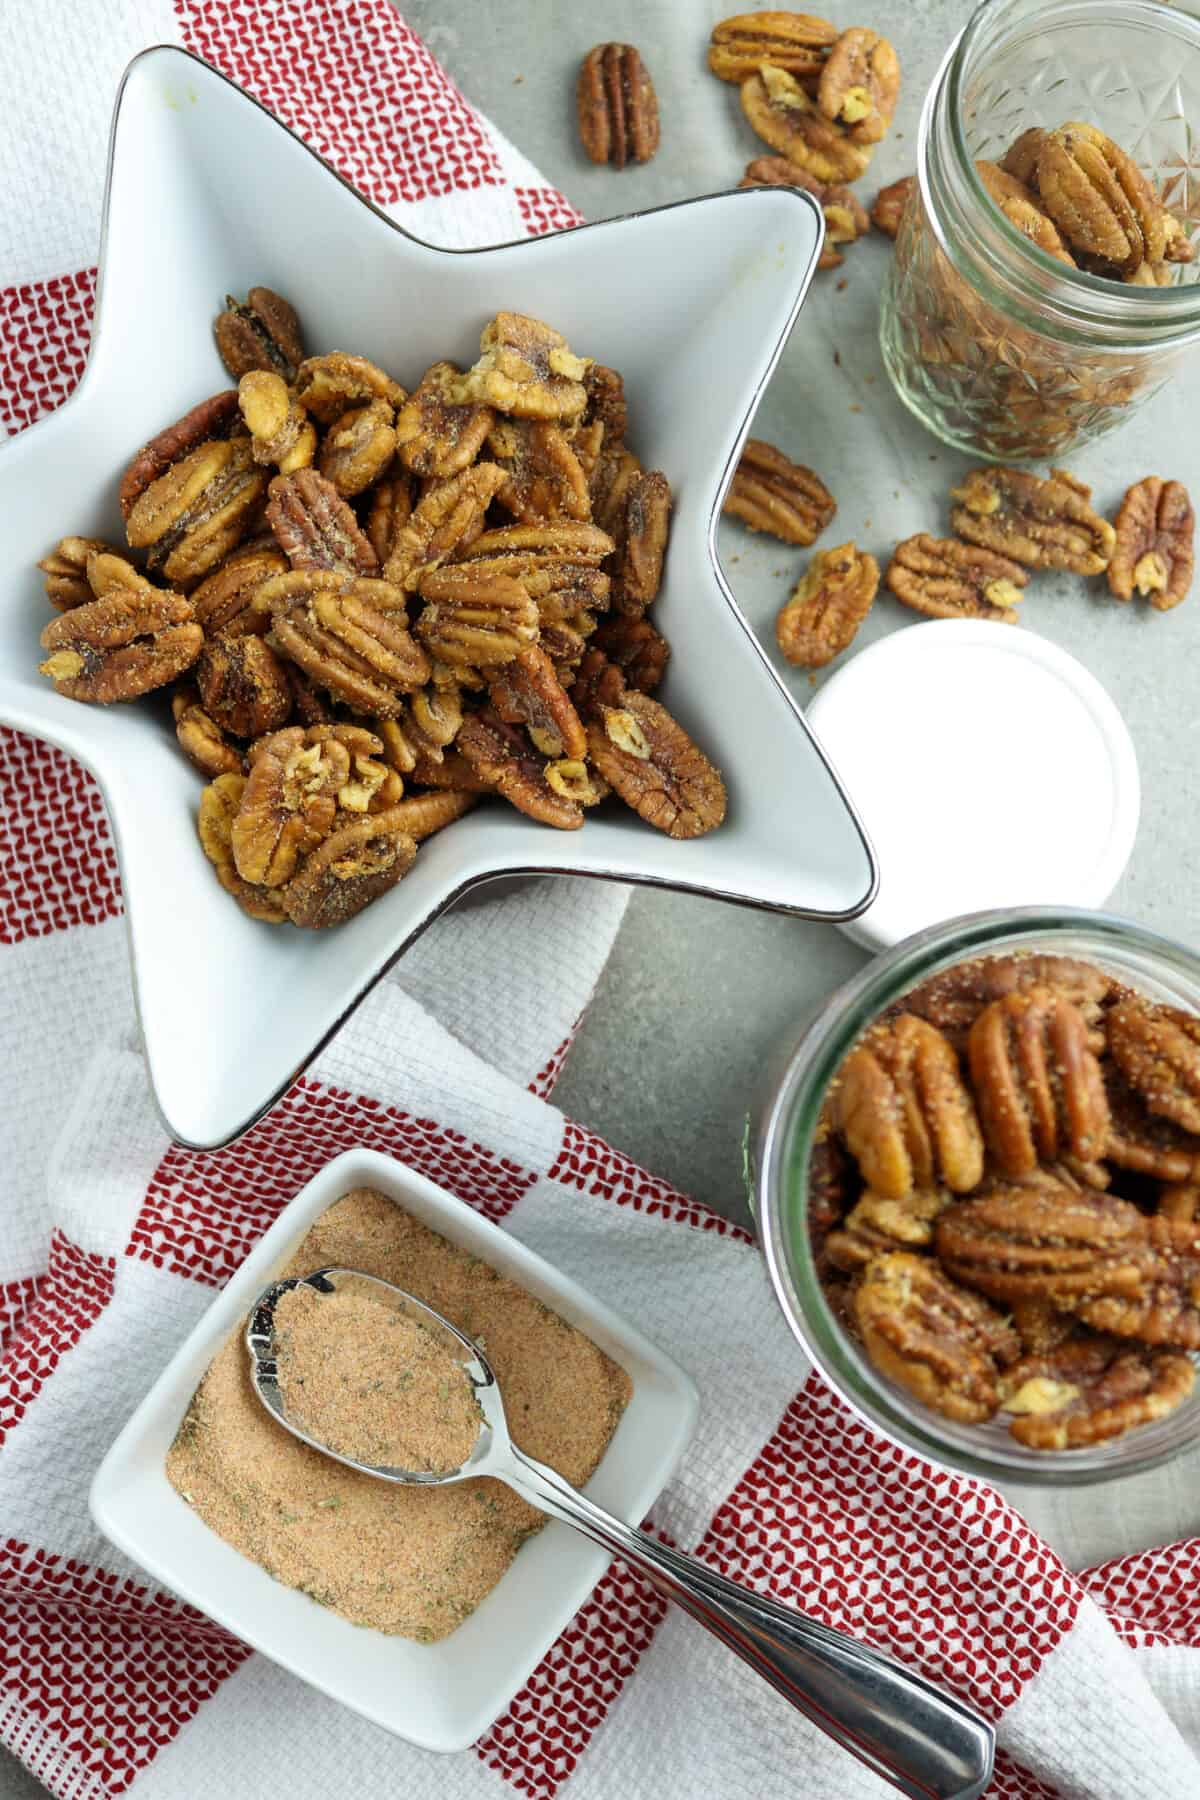 Roasted pecans in a star-shaped bowl and a jar.